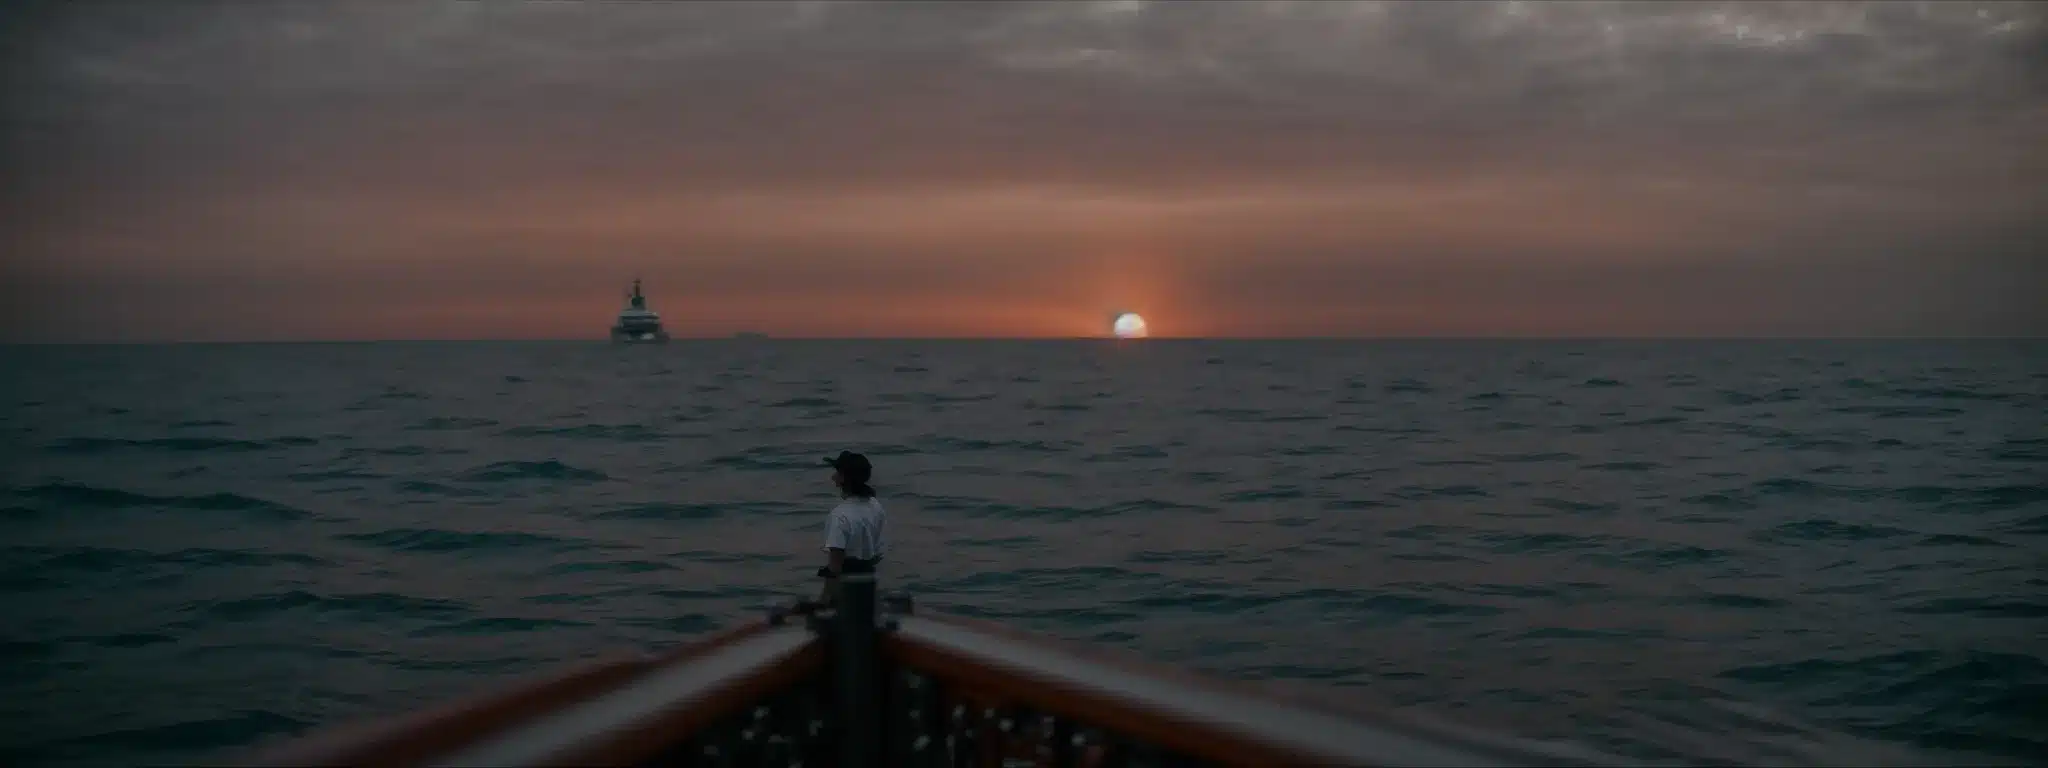 A Person Standing At The Helm Of A Ship, Navigating Through Calm Waters With A Sunset On The Horizon.